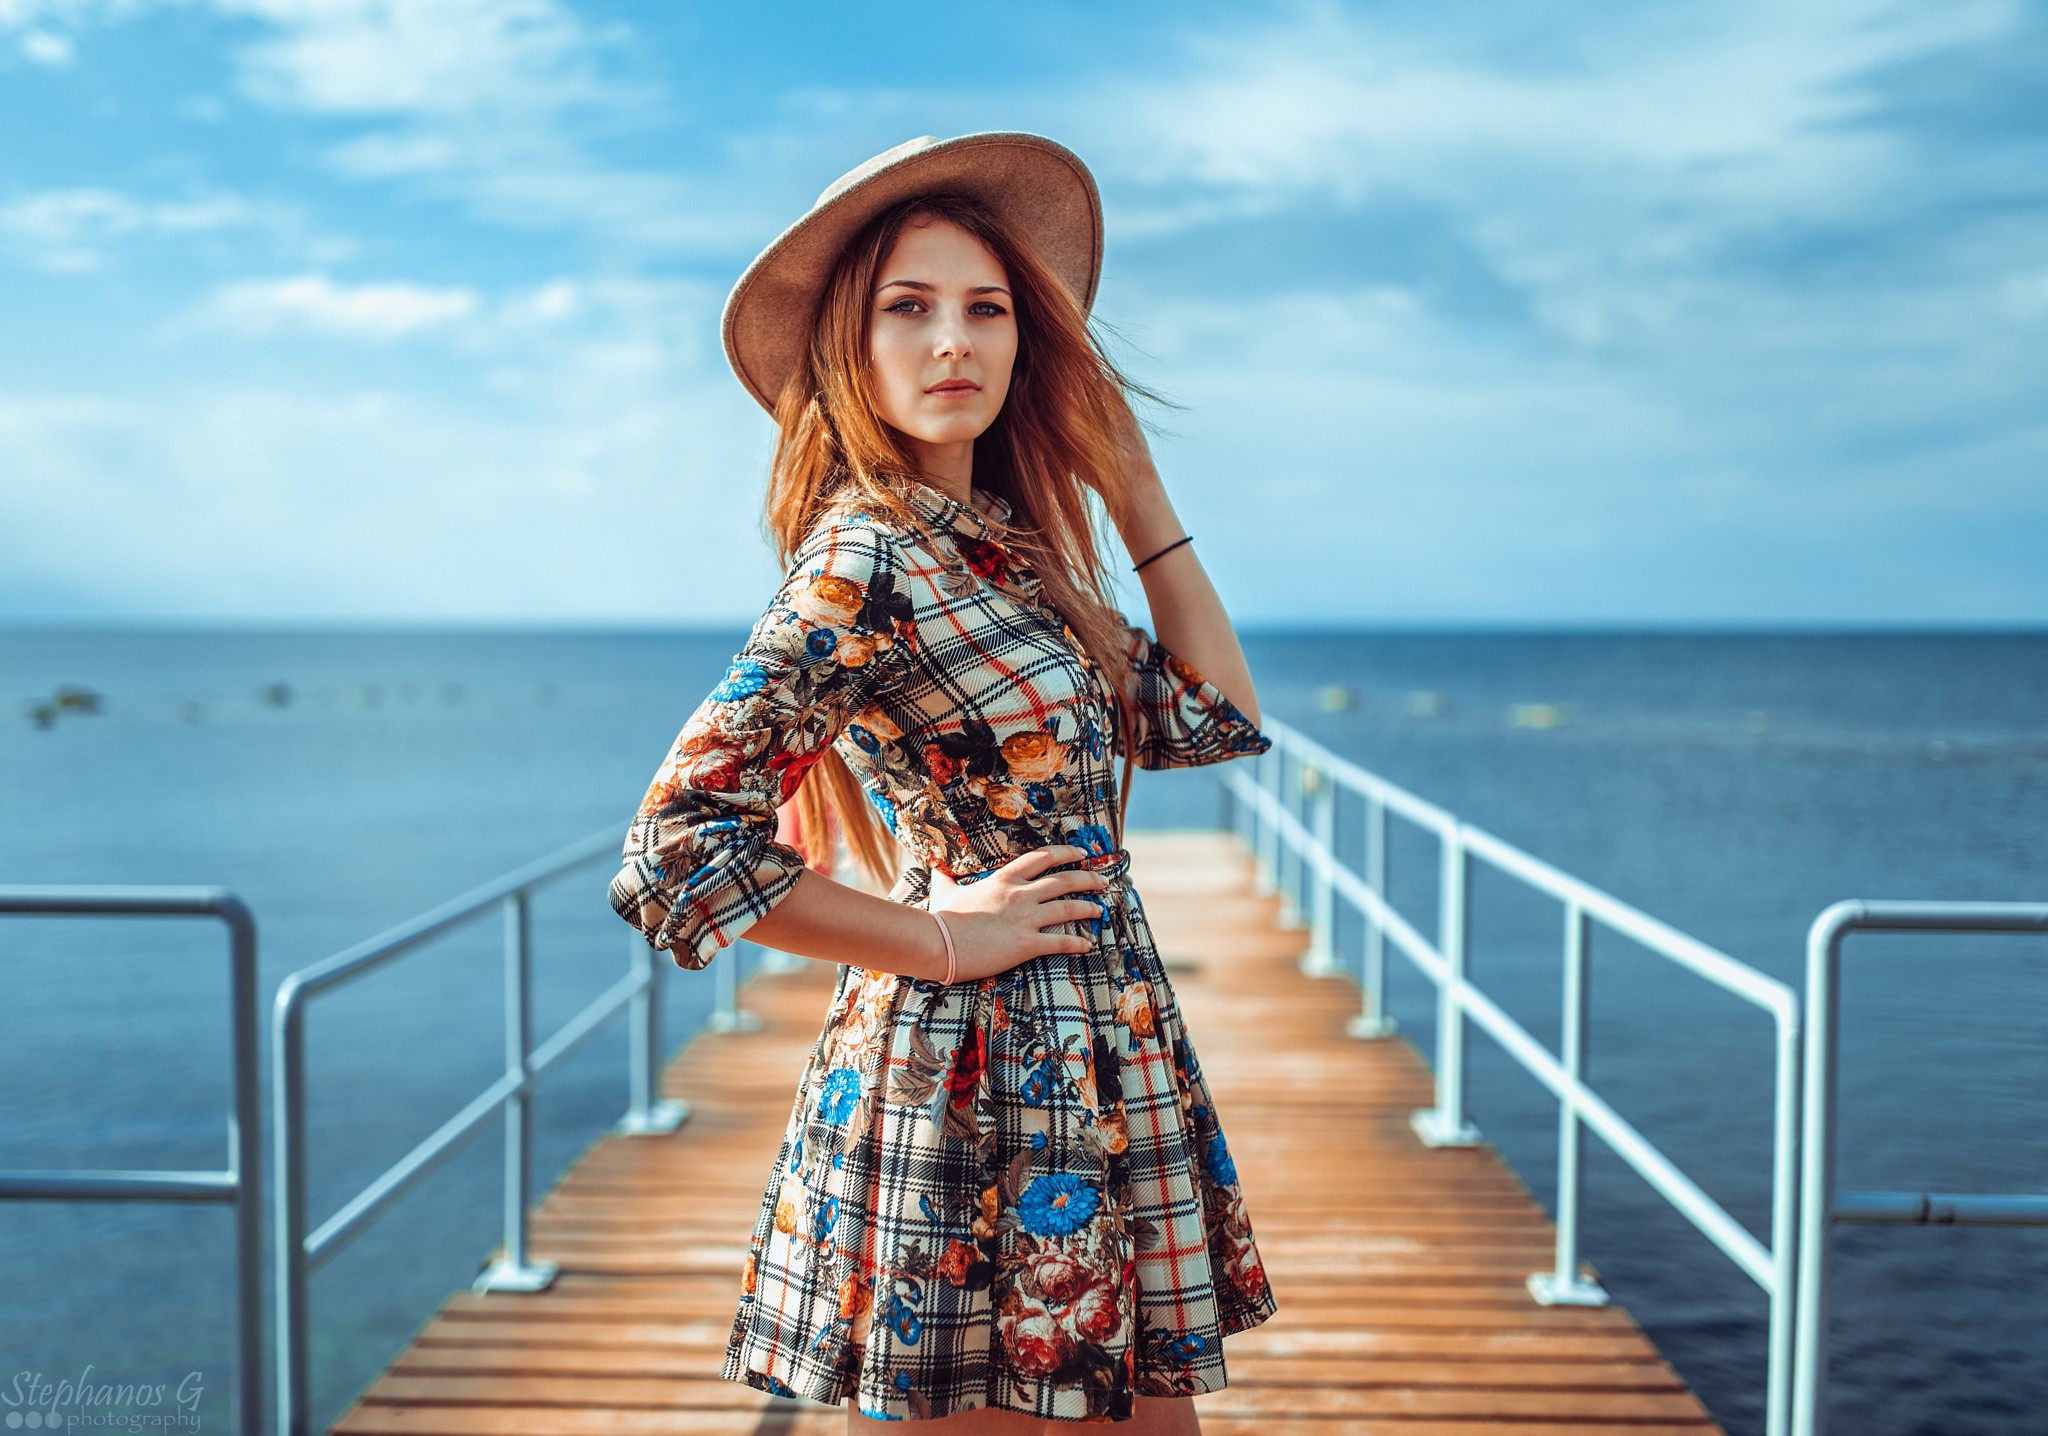 People 2048x1436 women model redhead blue eyes dress hat pier colorful women outdoors women with hats looking at viewer plaid clothing long hair Stephanos Georgiou watermarked sea water